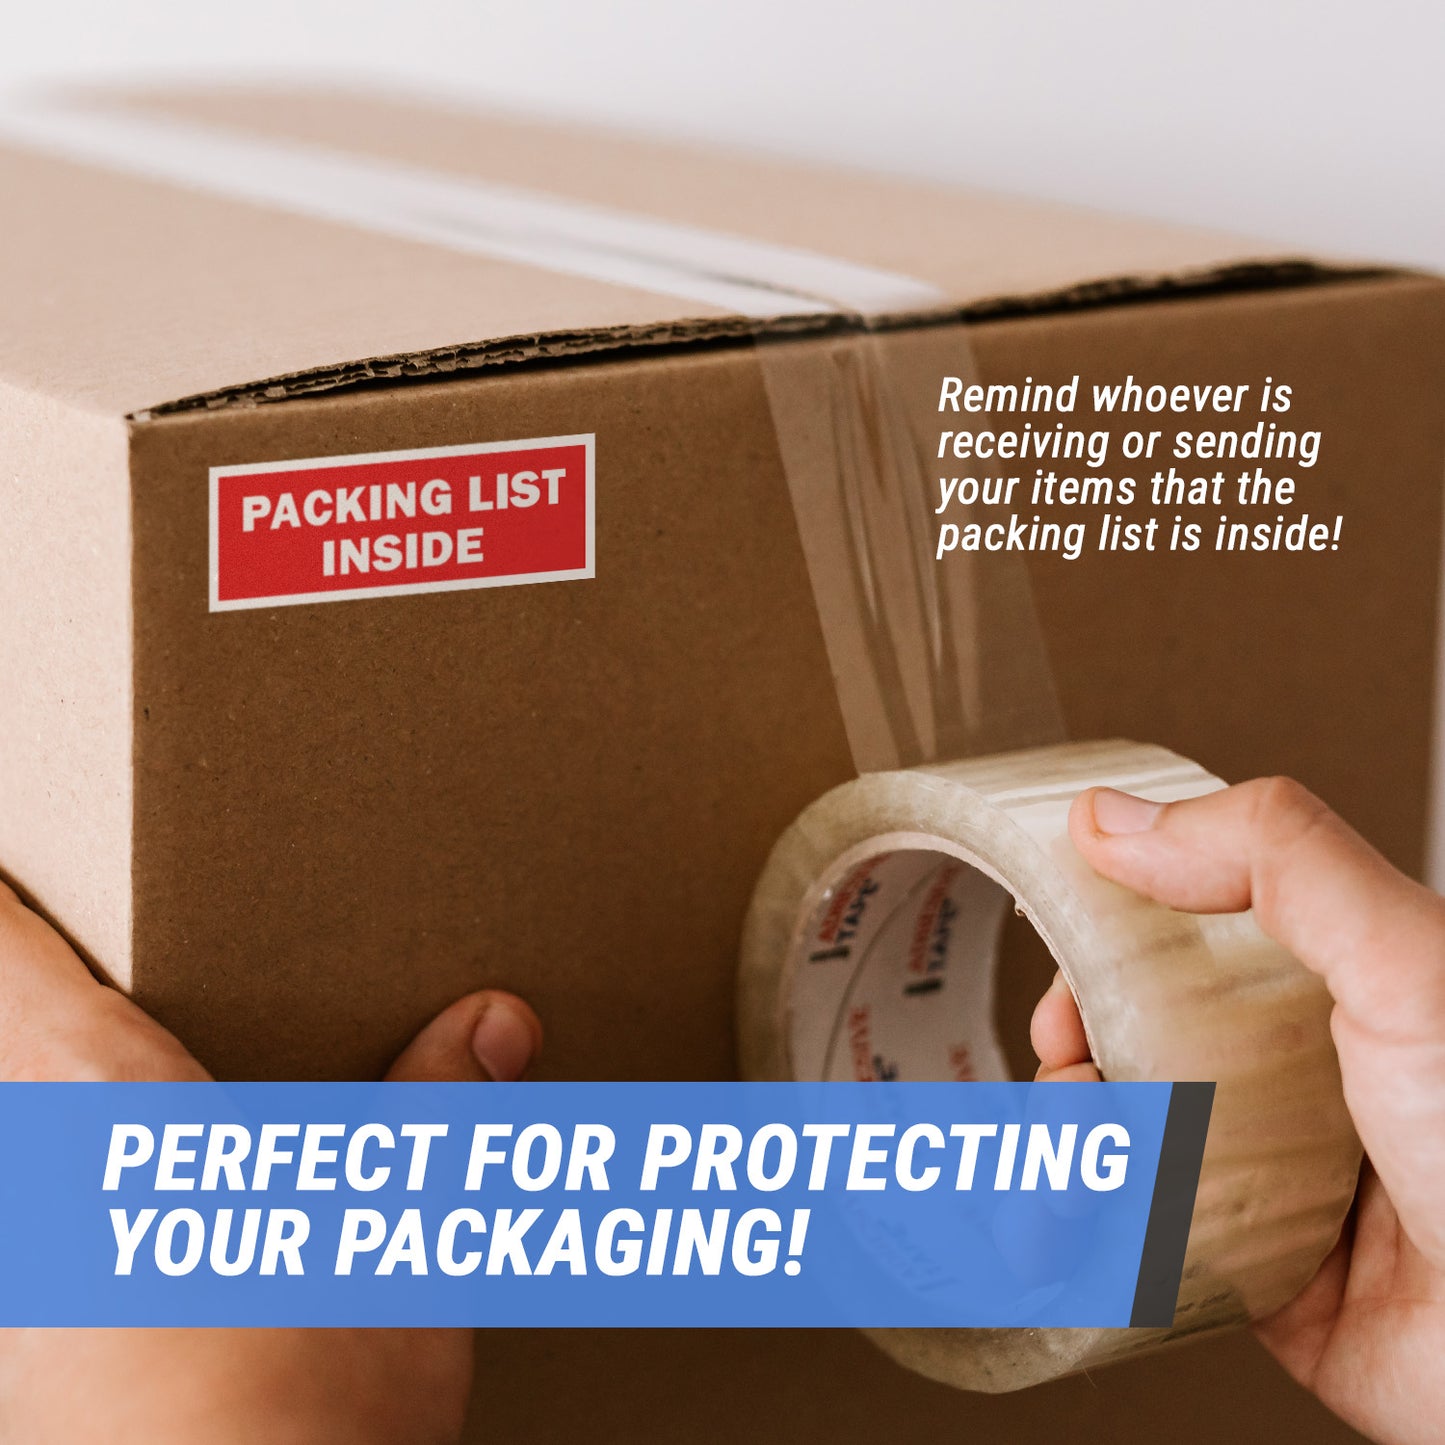 4 x 1.5 inch | Shipping & Handling: Packing List Inside Stickers